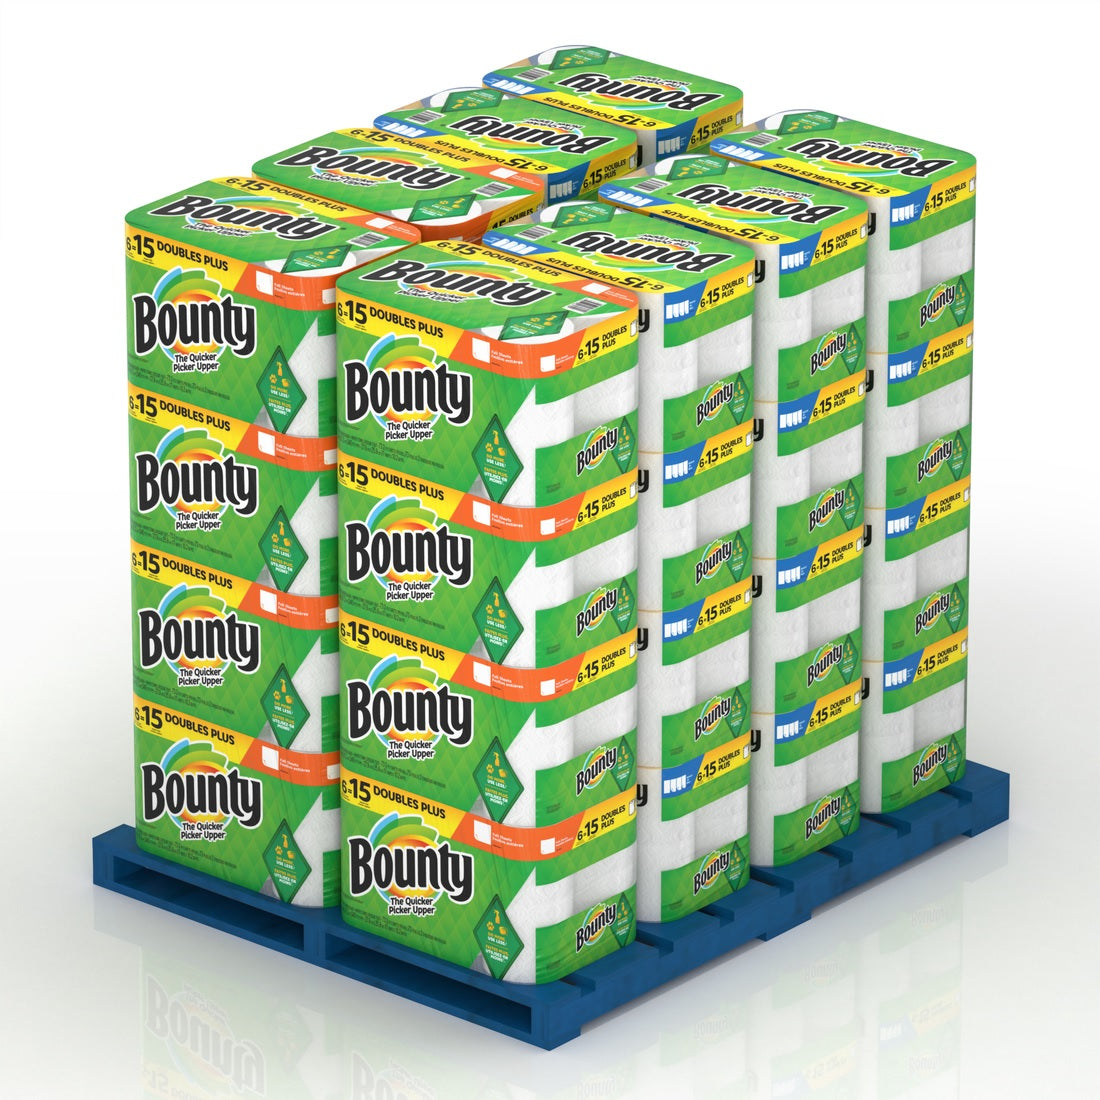 Bounty Display Mixed Paper Towel with White & SAS Double Roll Paper - 32ct